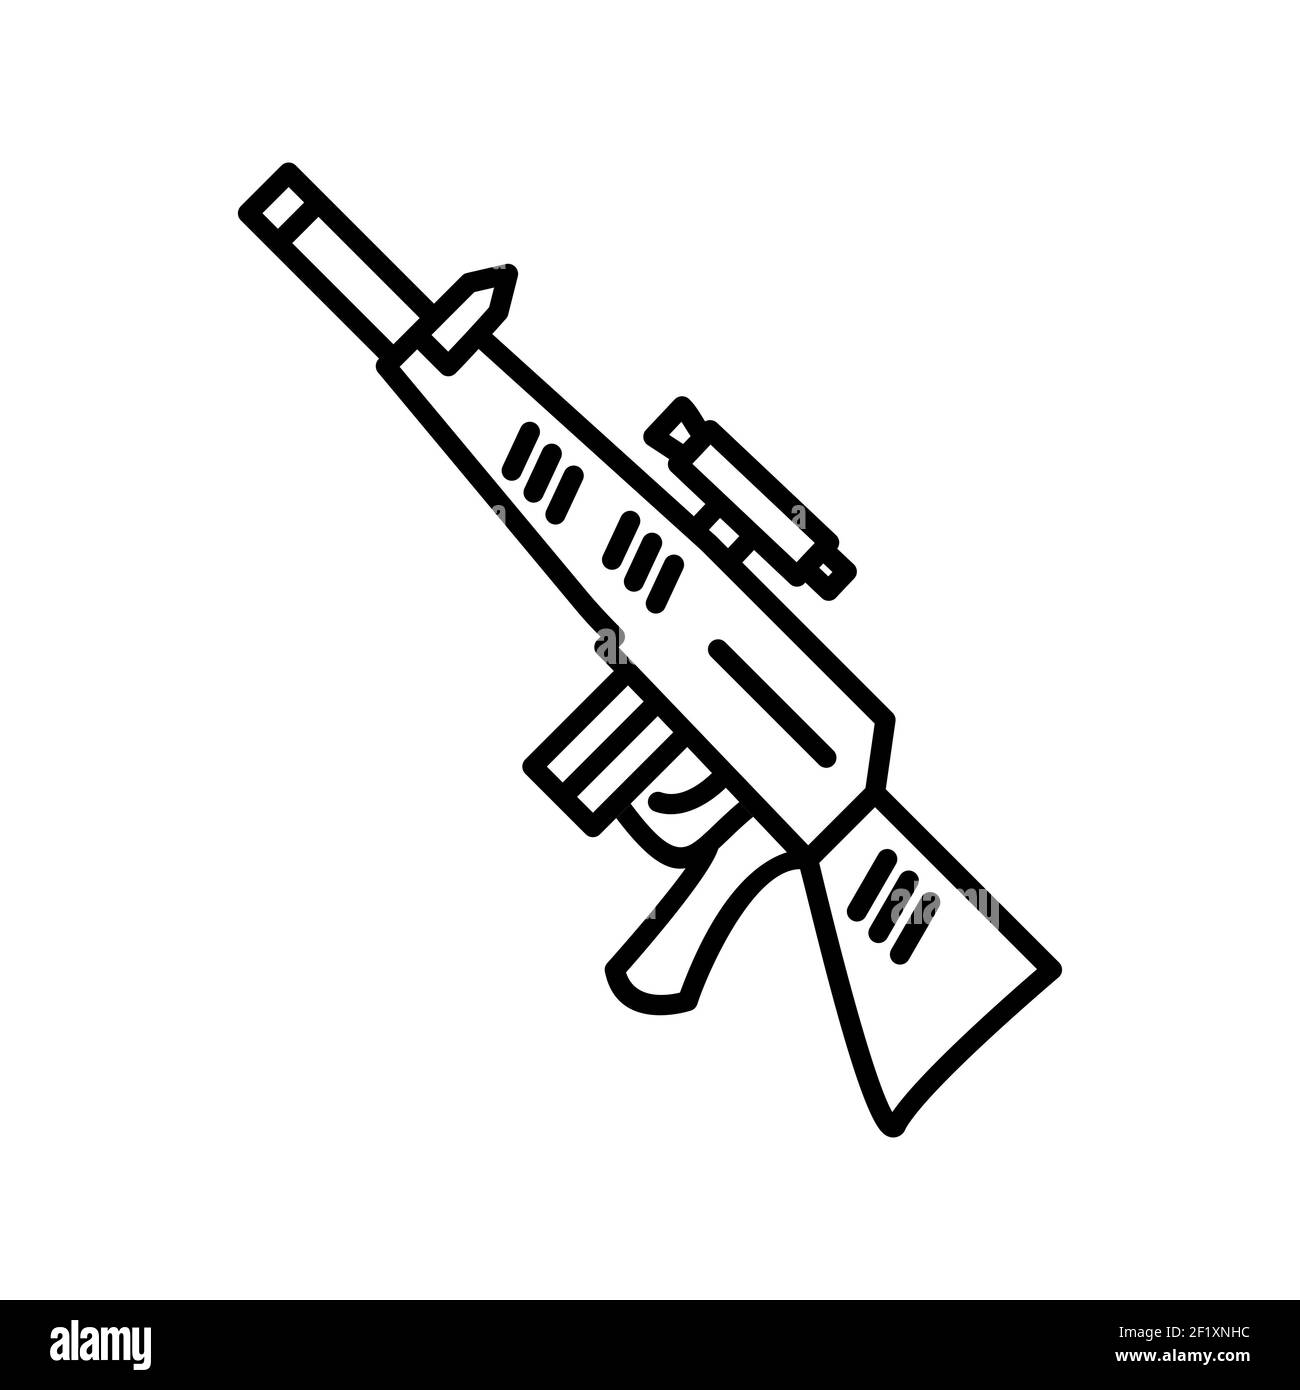 An illustration of a unique sniper line vector icon on a white background Stock Photo